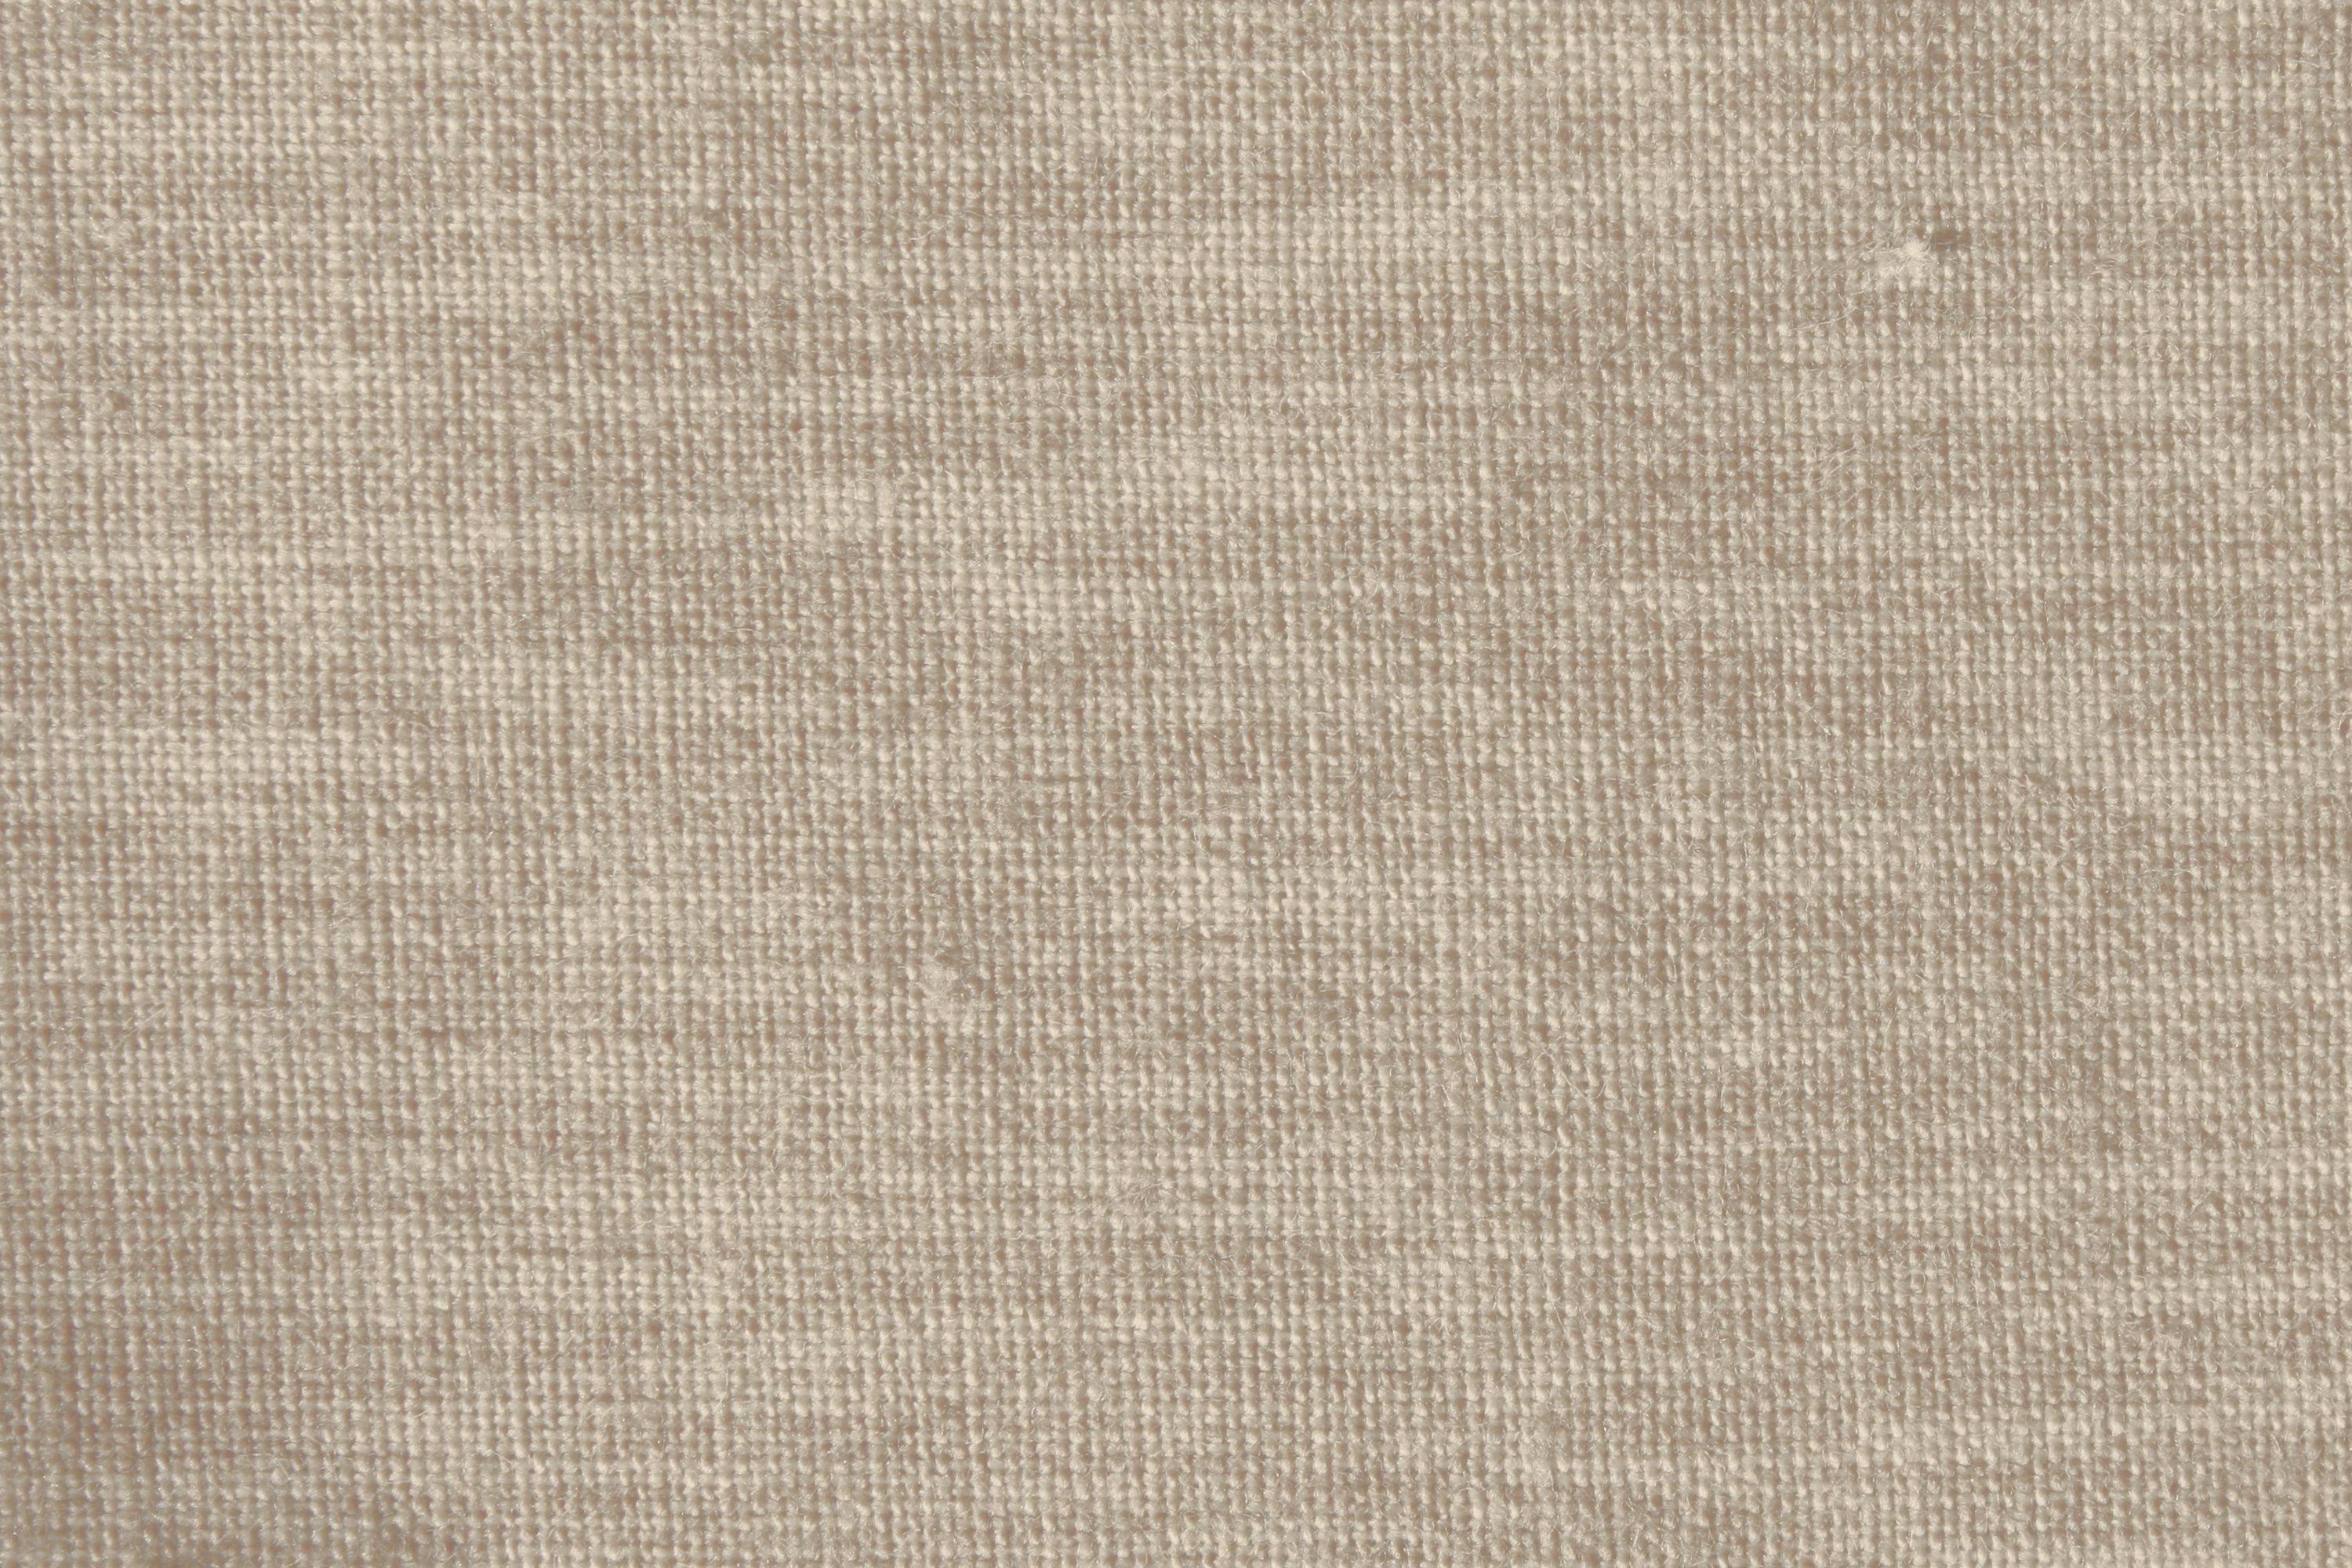 Beige Woven Fabric Close Up Texture Picture Free Photograph Photos